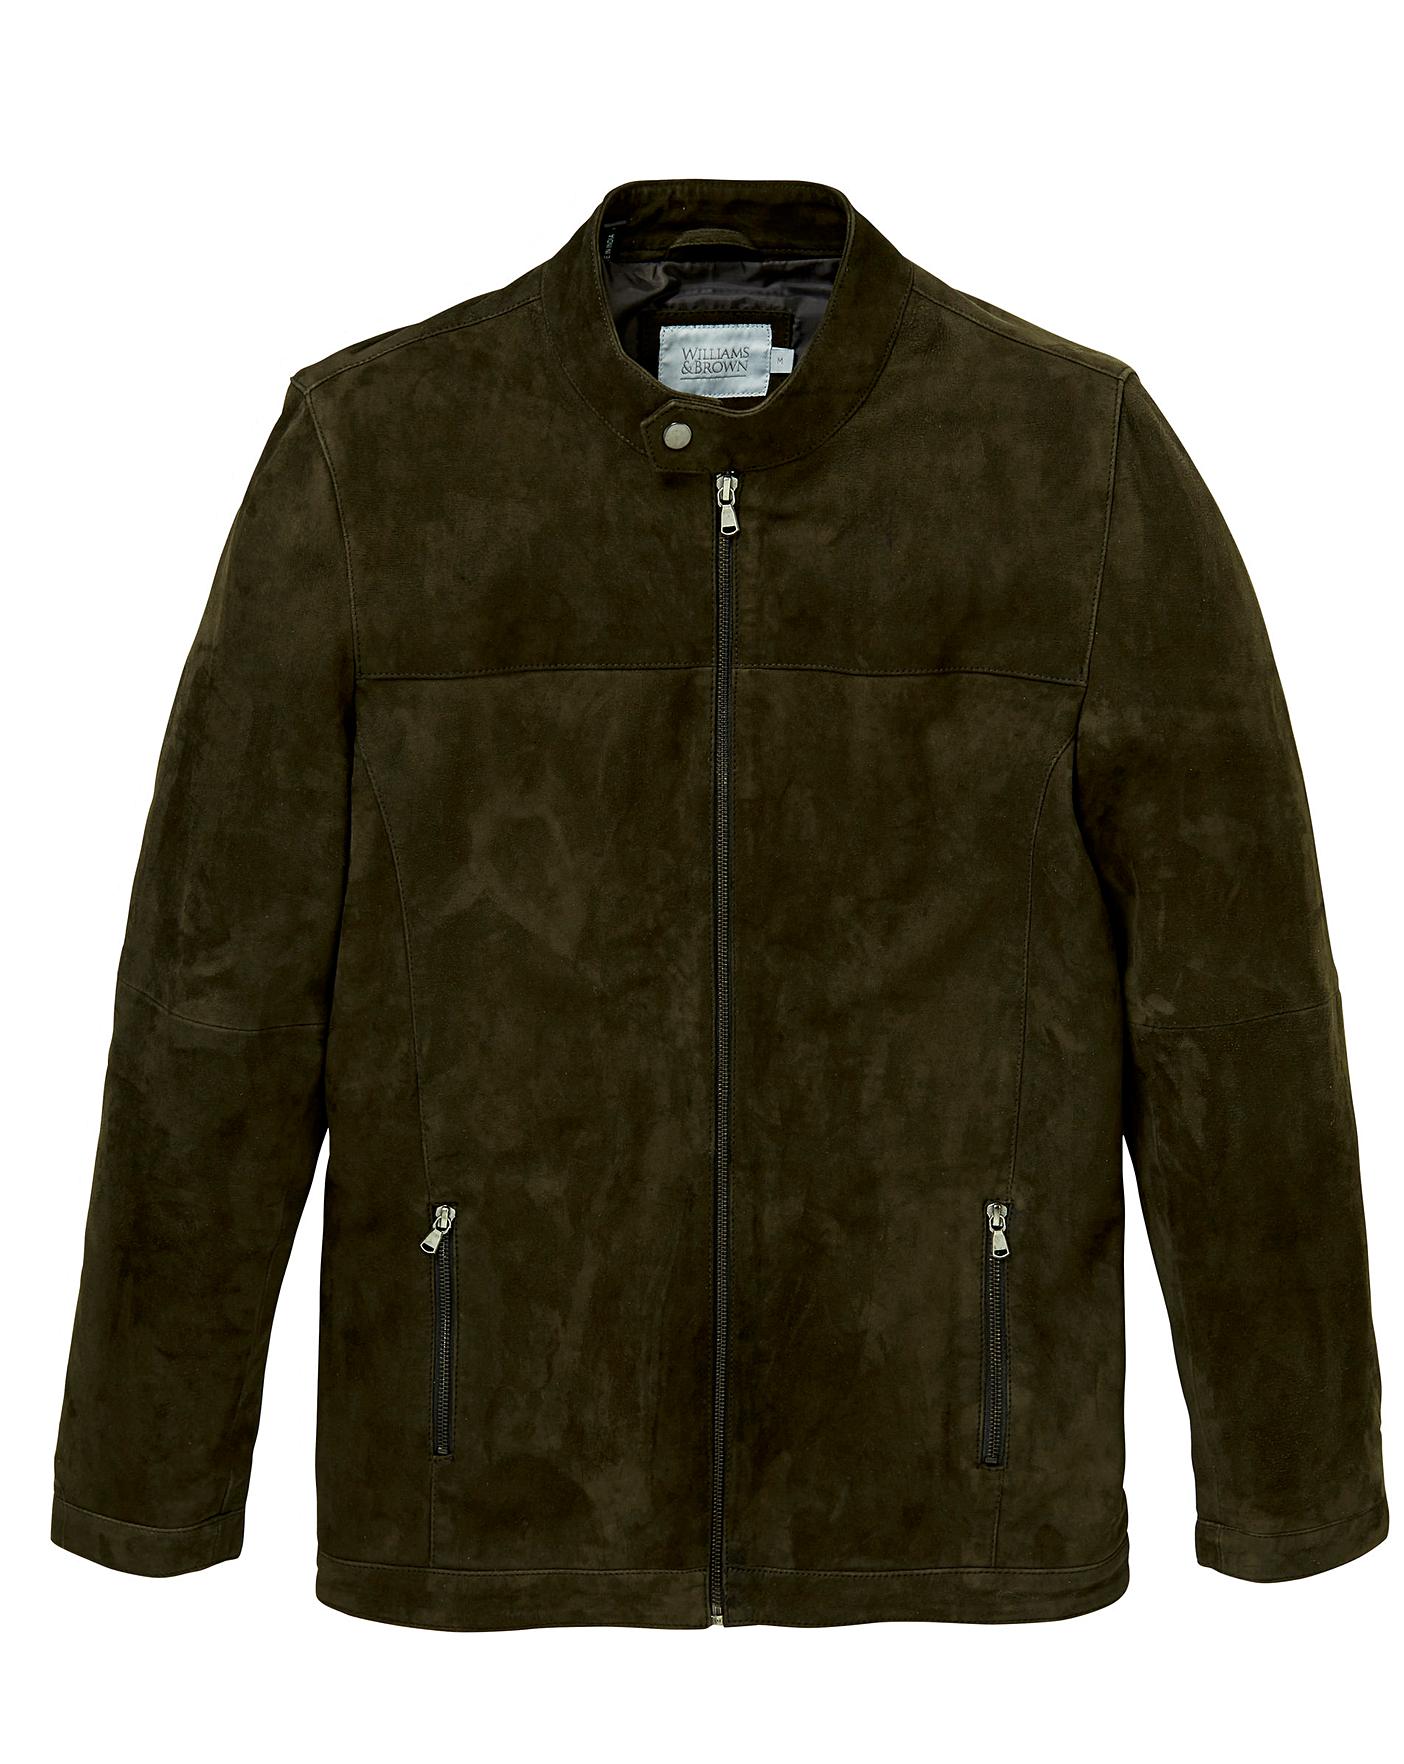 W&B Olive Suede Biker Style Jacket R | Crazy Clearance